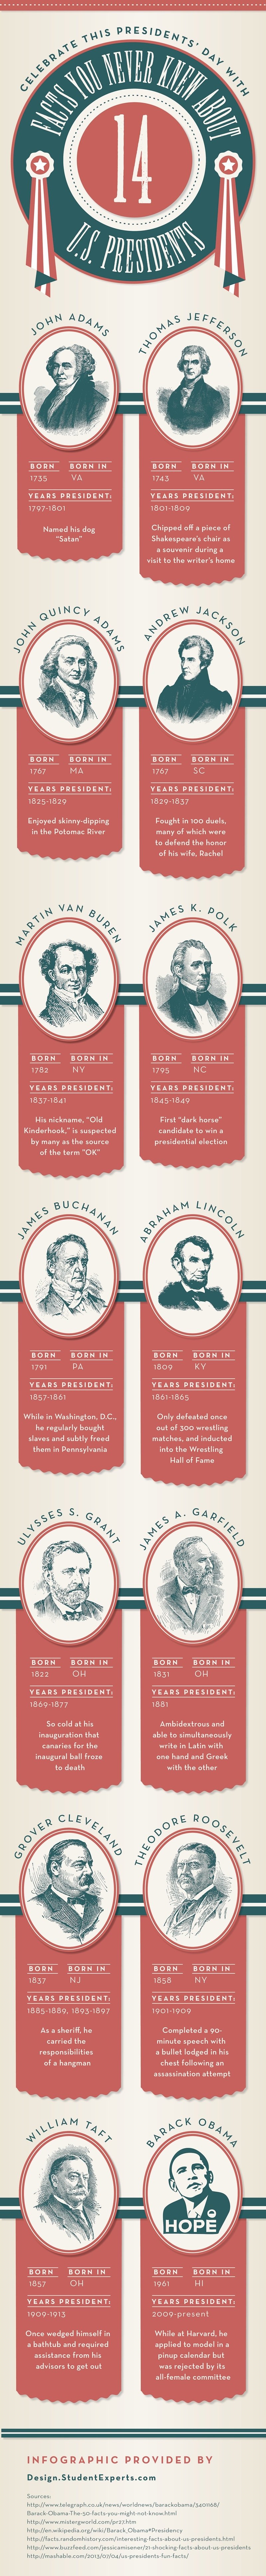 Presidents-Day-Infographic